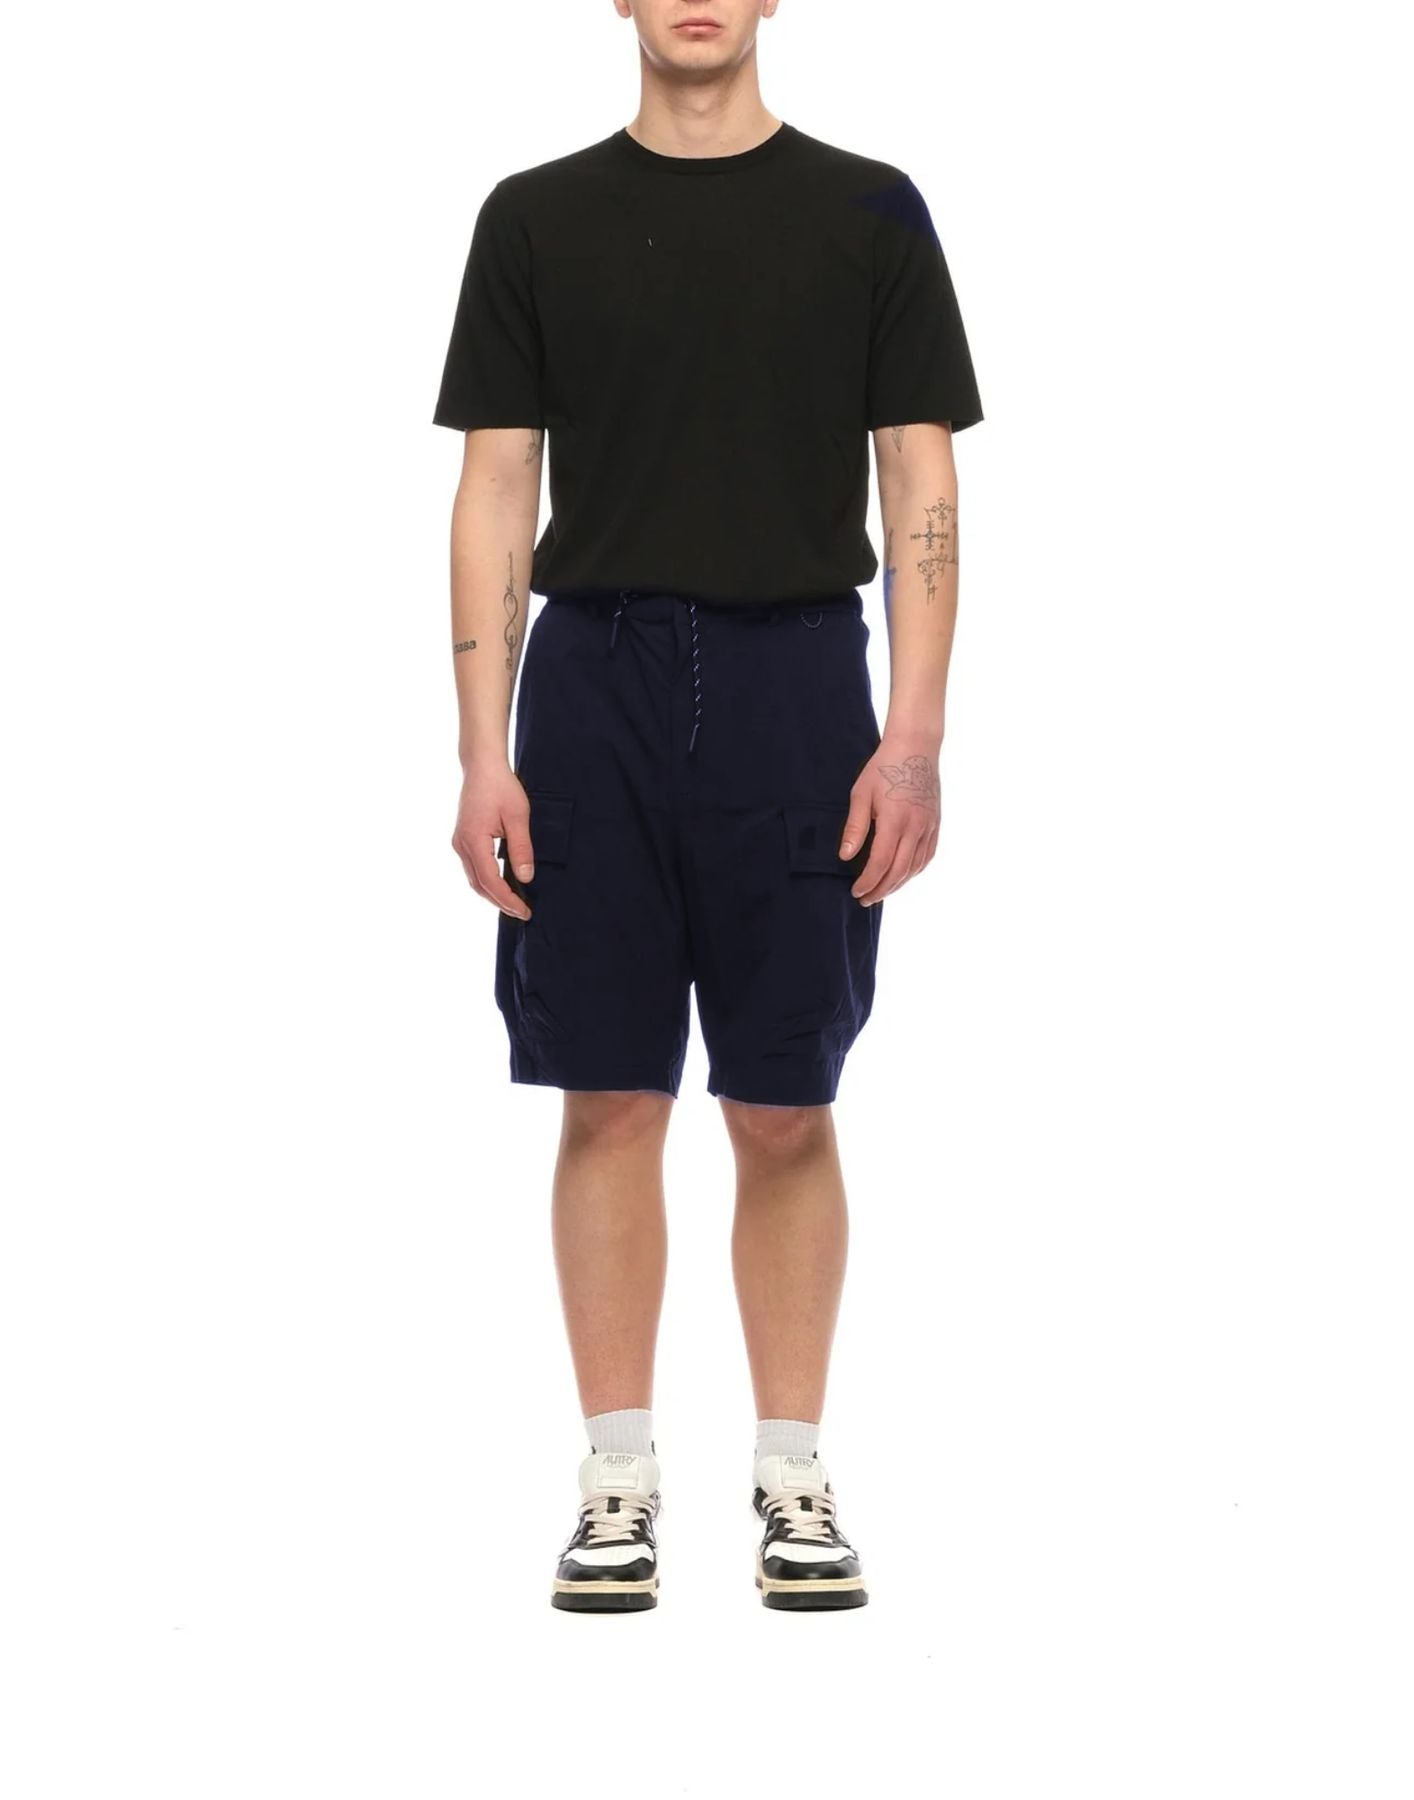 Shorts man EOTM216AG42 NAVY OUTHERE